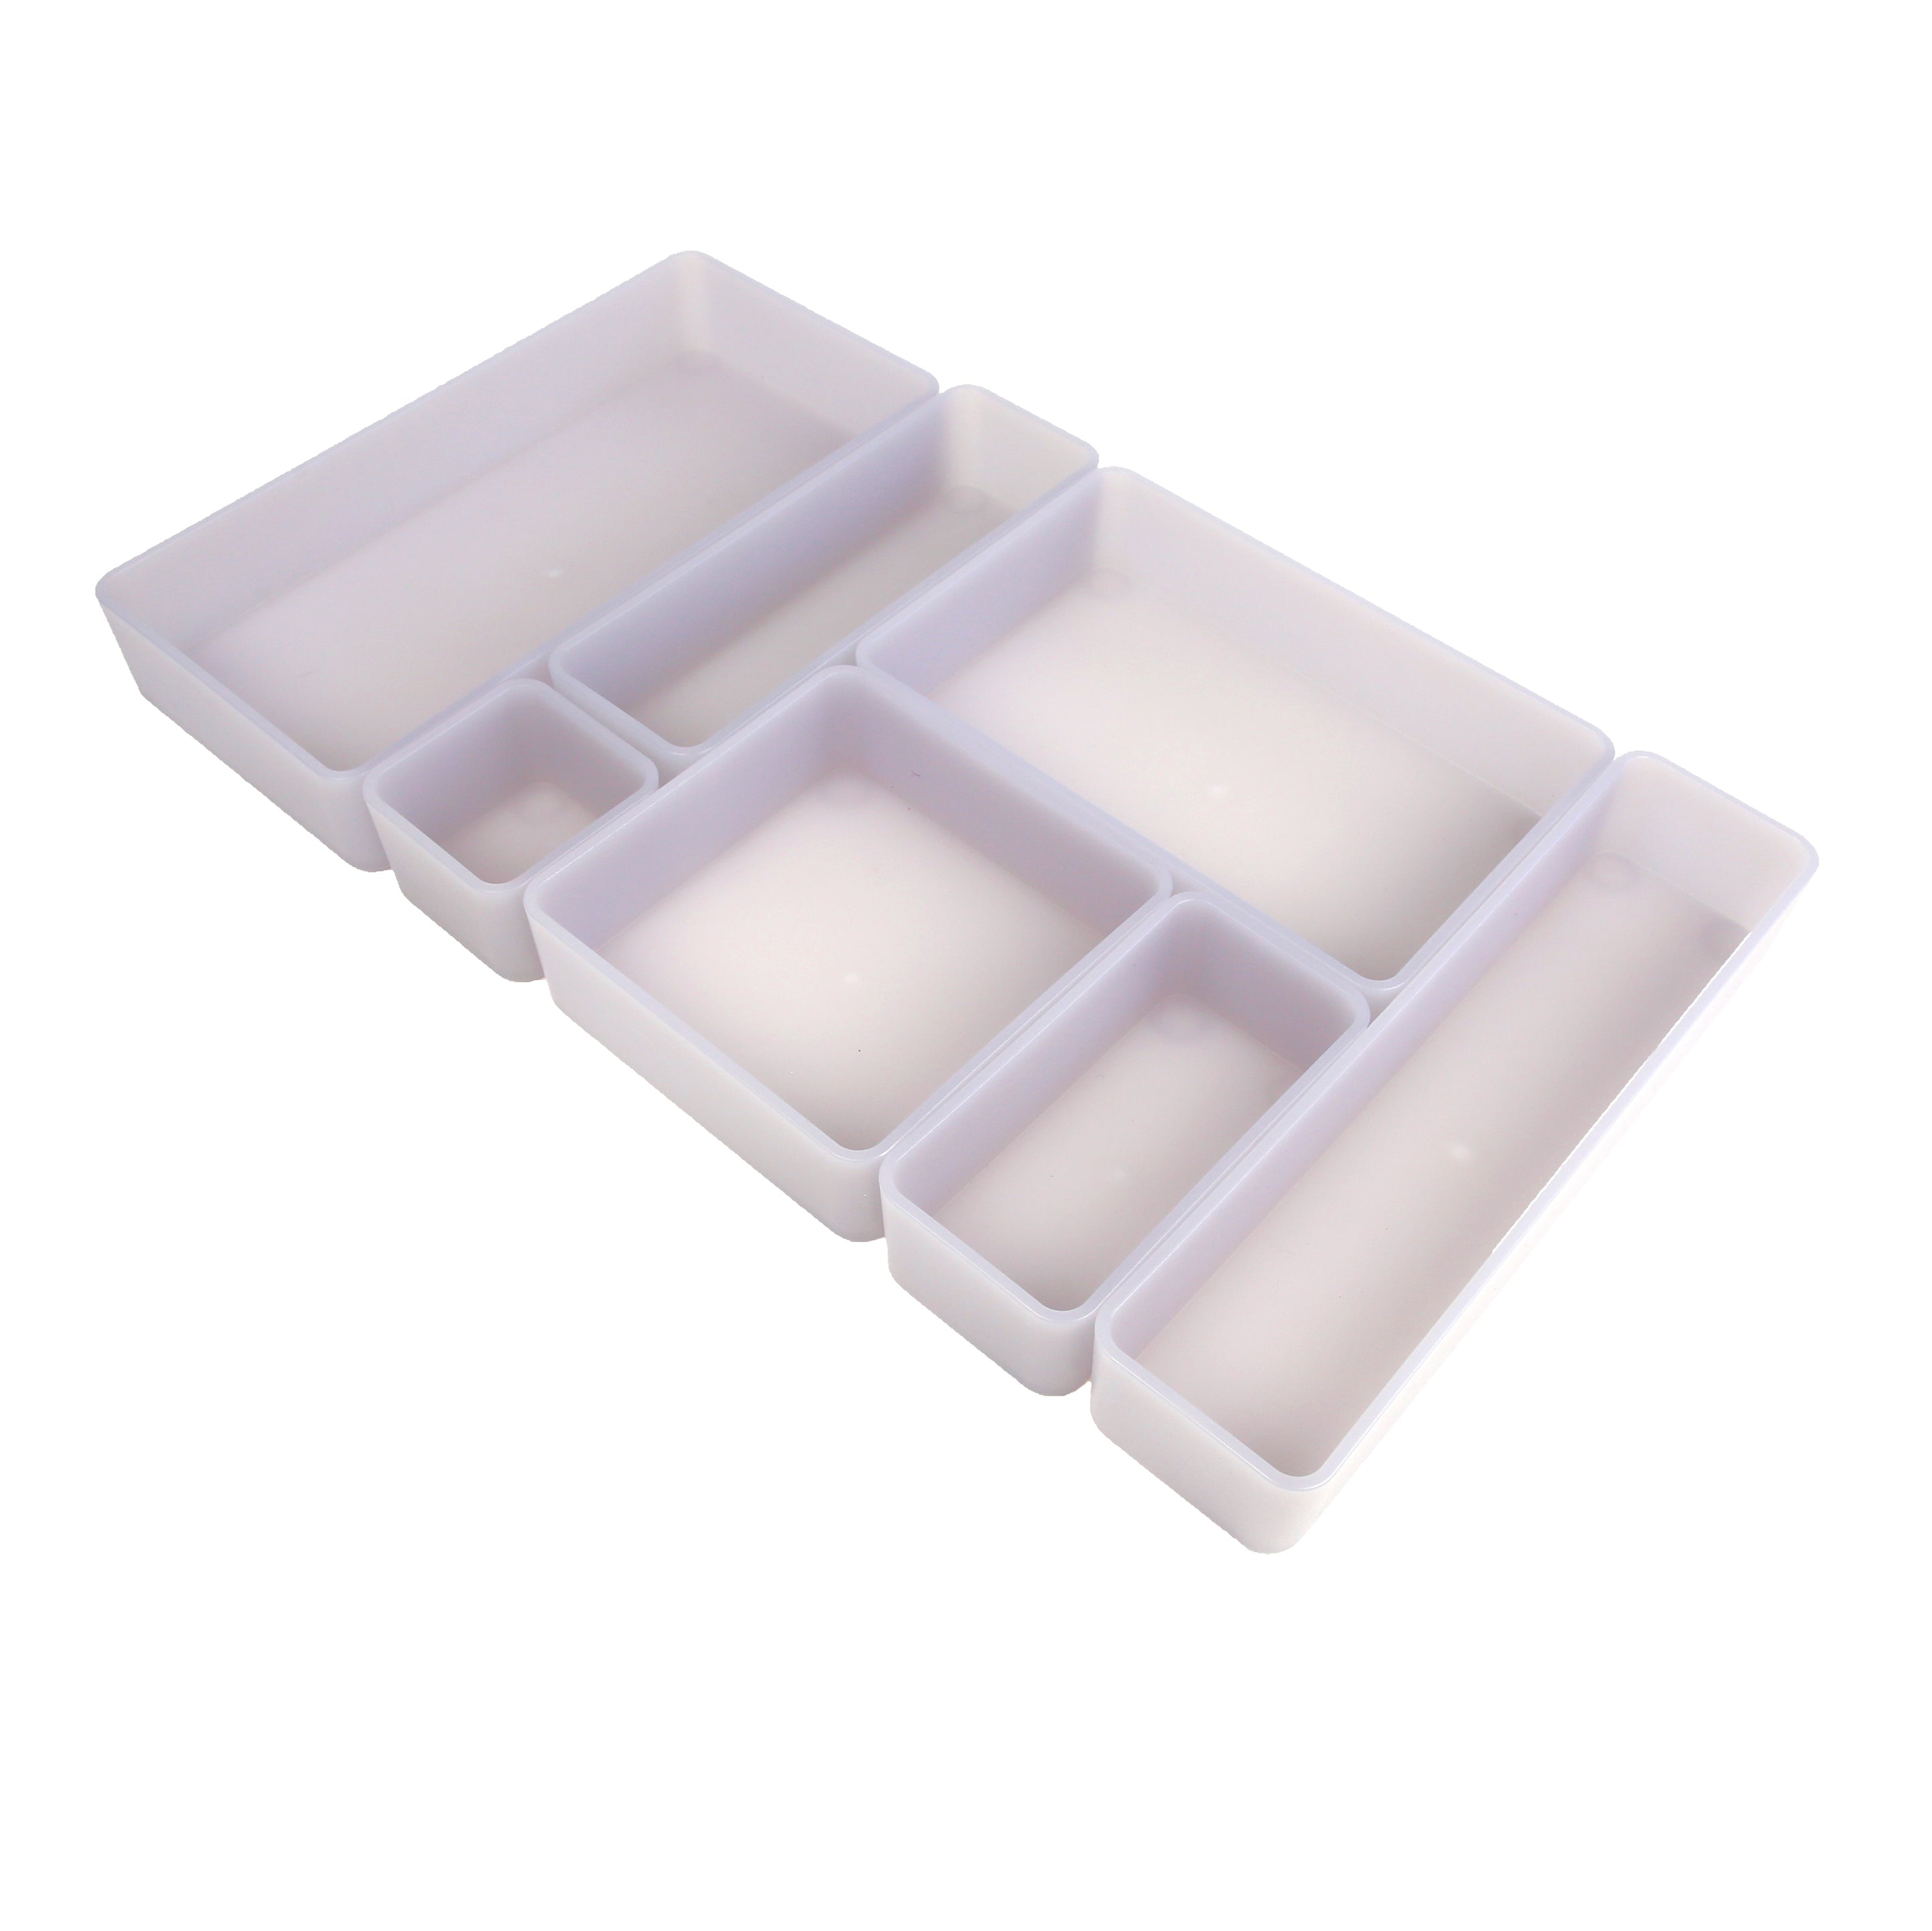 reSTAK recycled stackable organizing bins set of 7